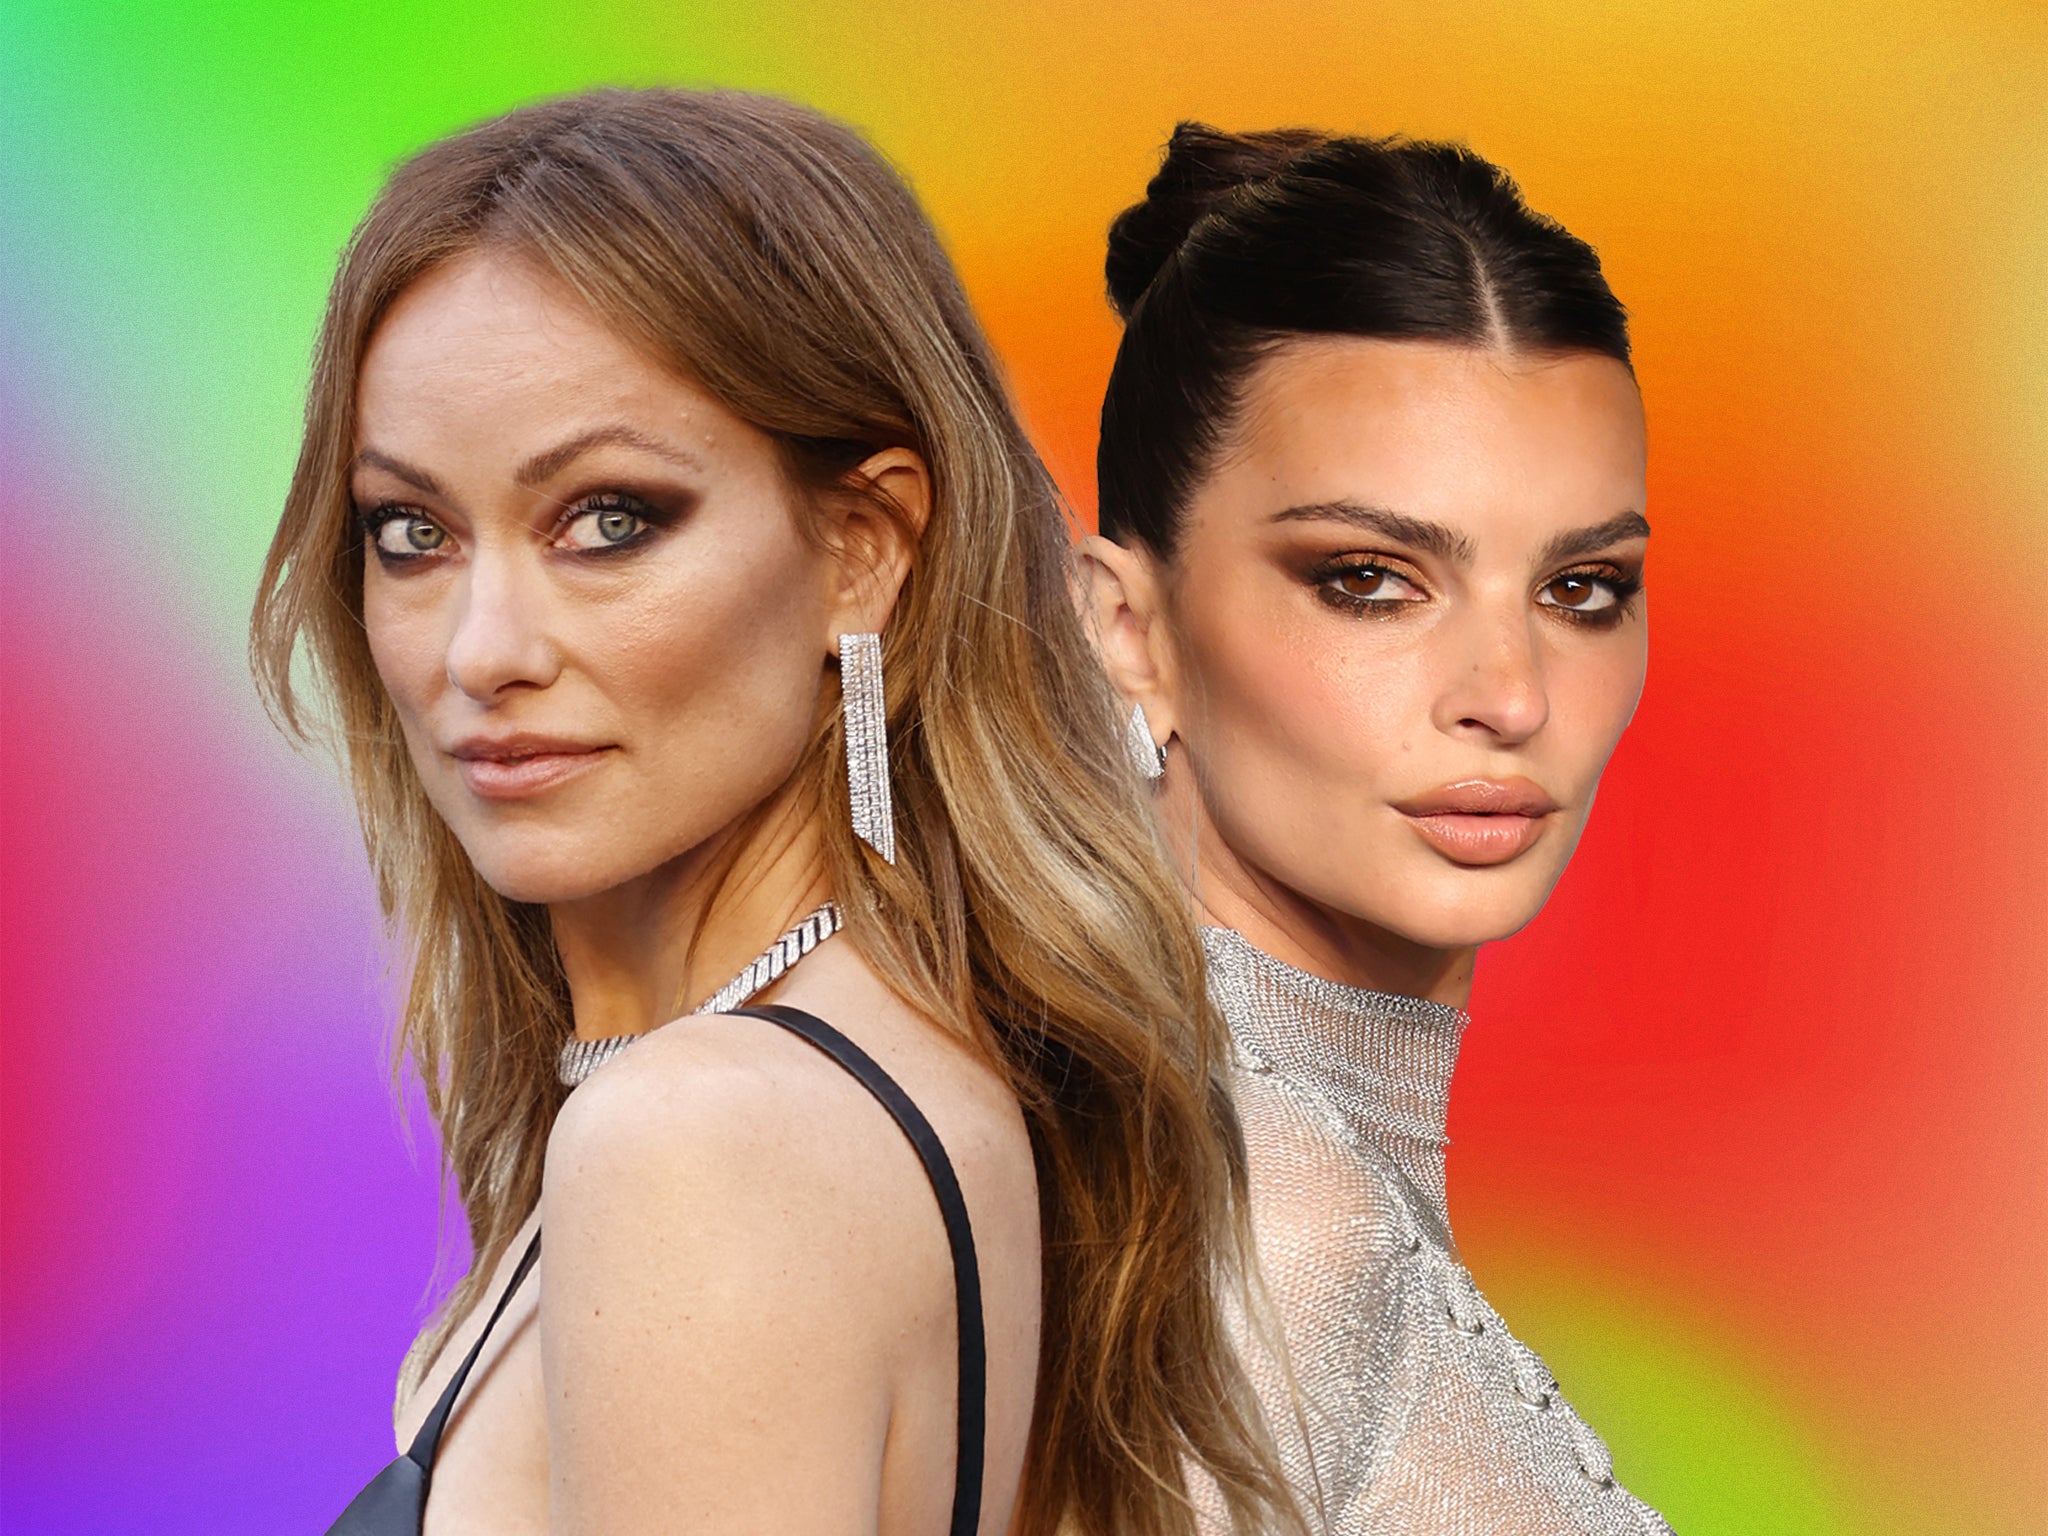 Filmmaker and actor Olivia Wilde and model and podcaster Emily Ratajkowski have been embroiled in a ‘girl code’ snafu